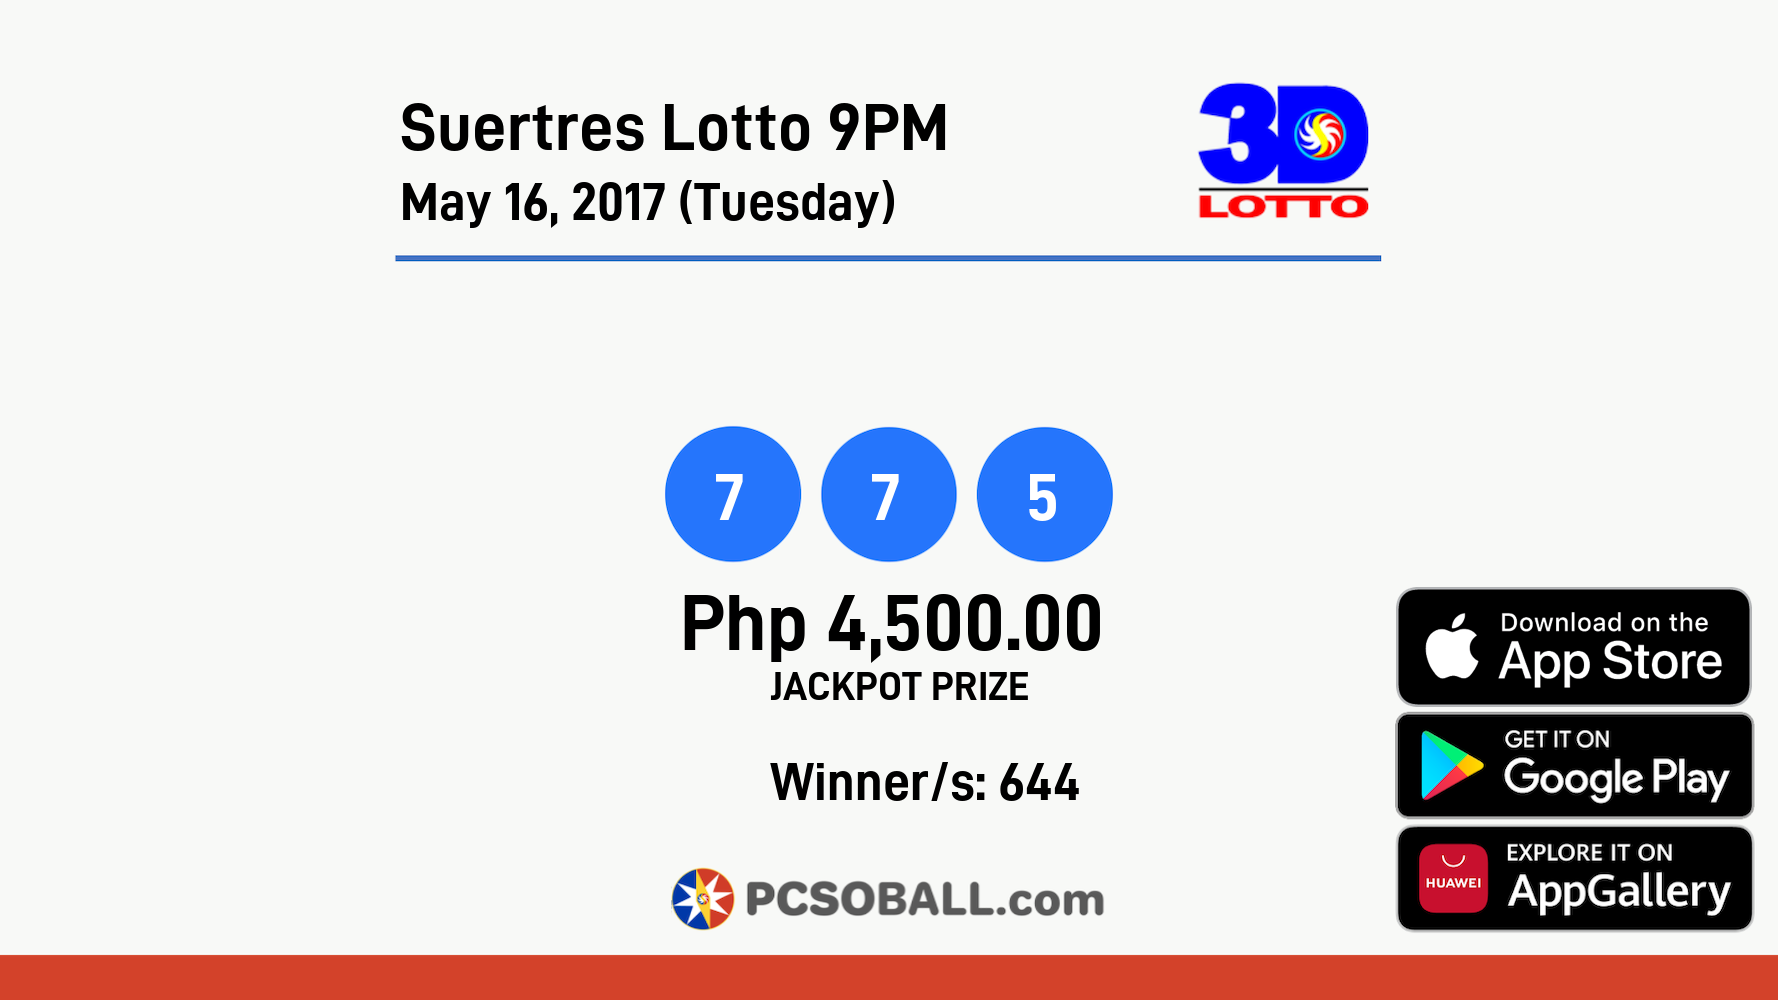 Suertres Lotto 9PM May 16, 2017 (Tuesday) Result